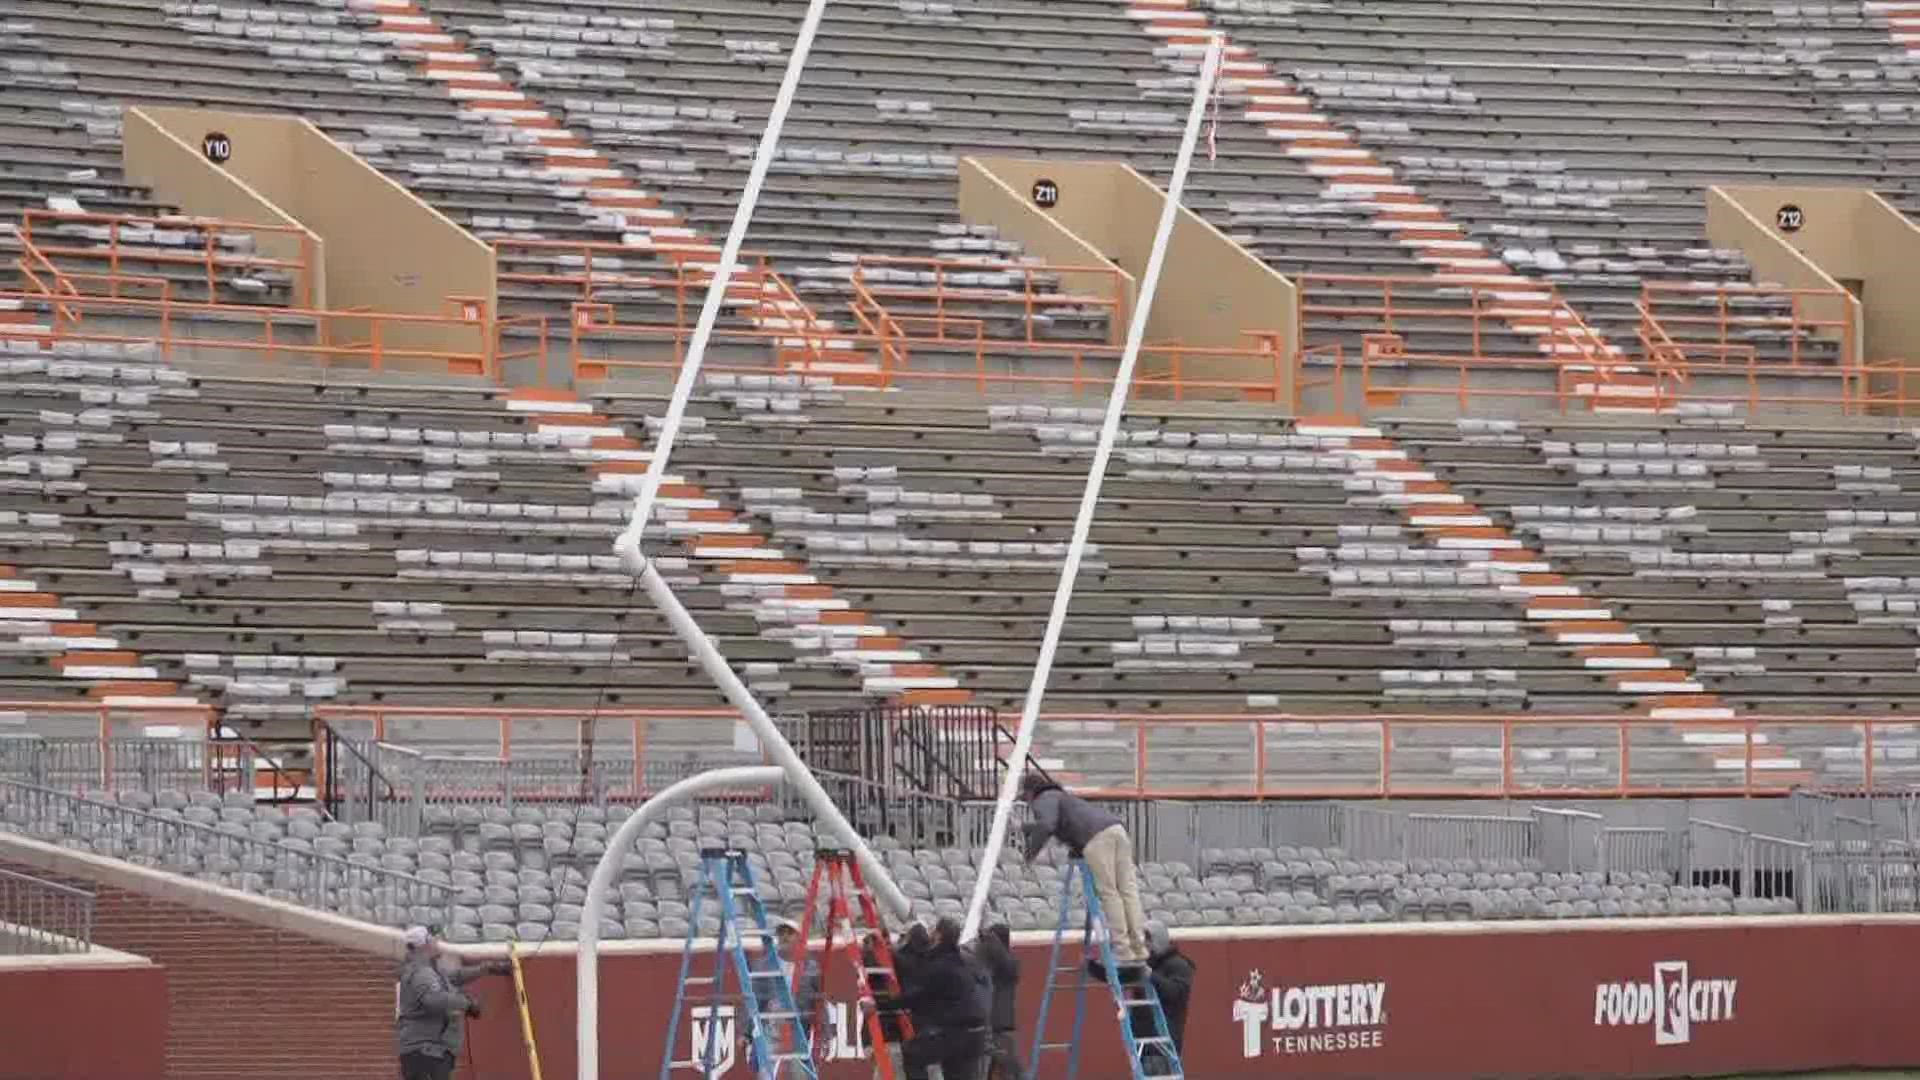 The goalposts were taken down by fans after the Vols win against Alabama.